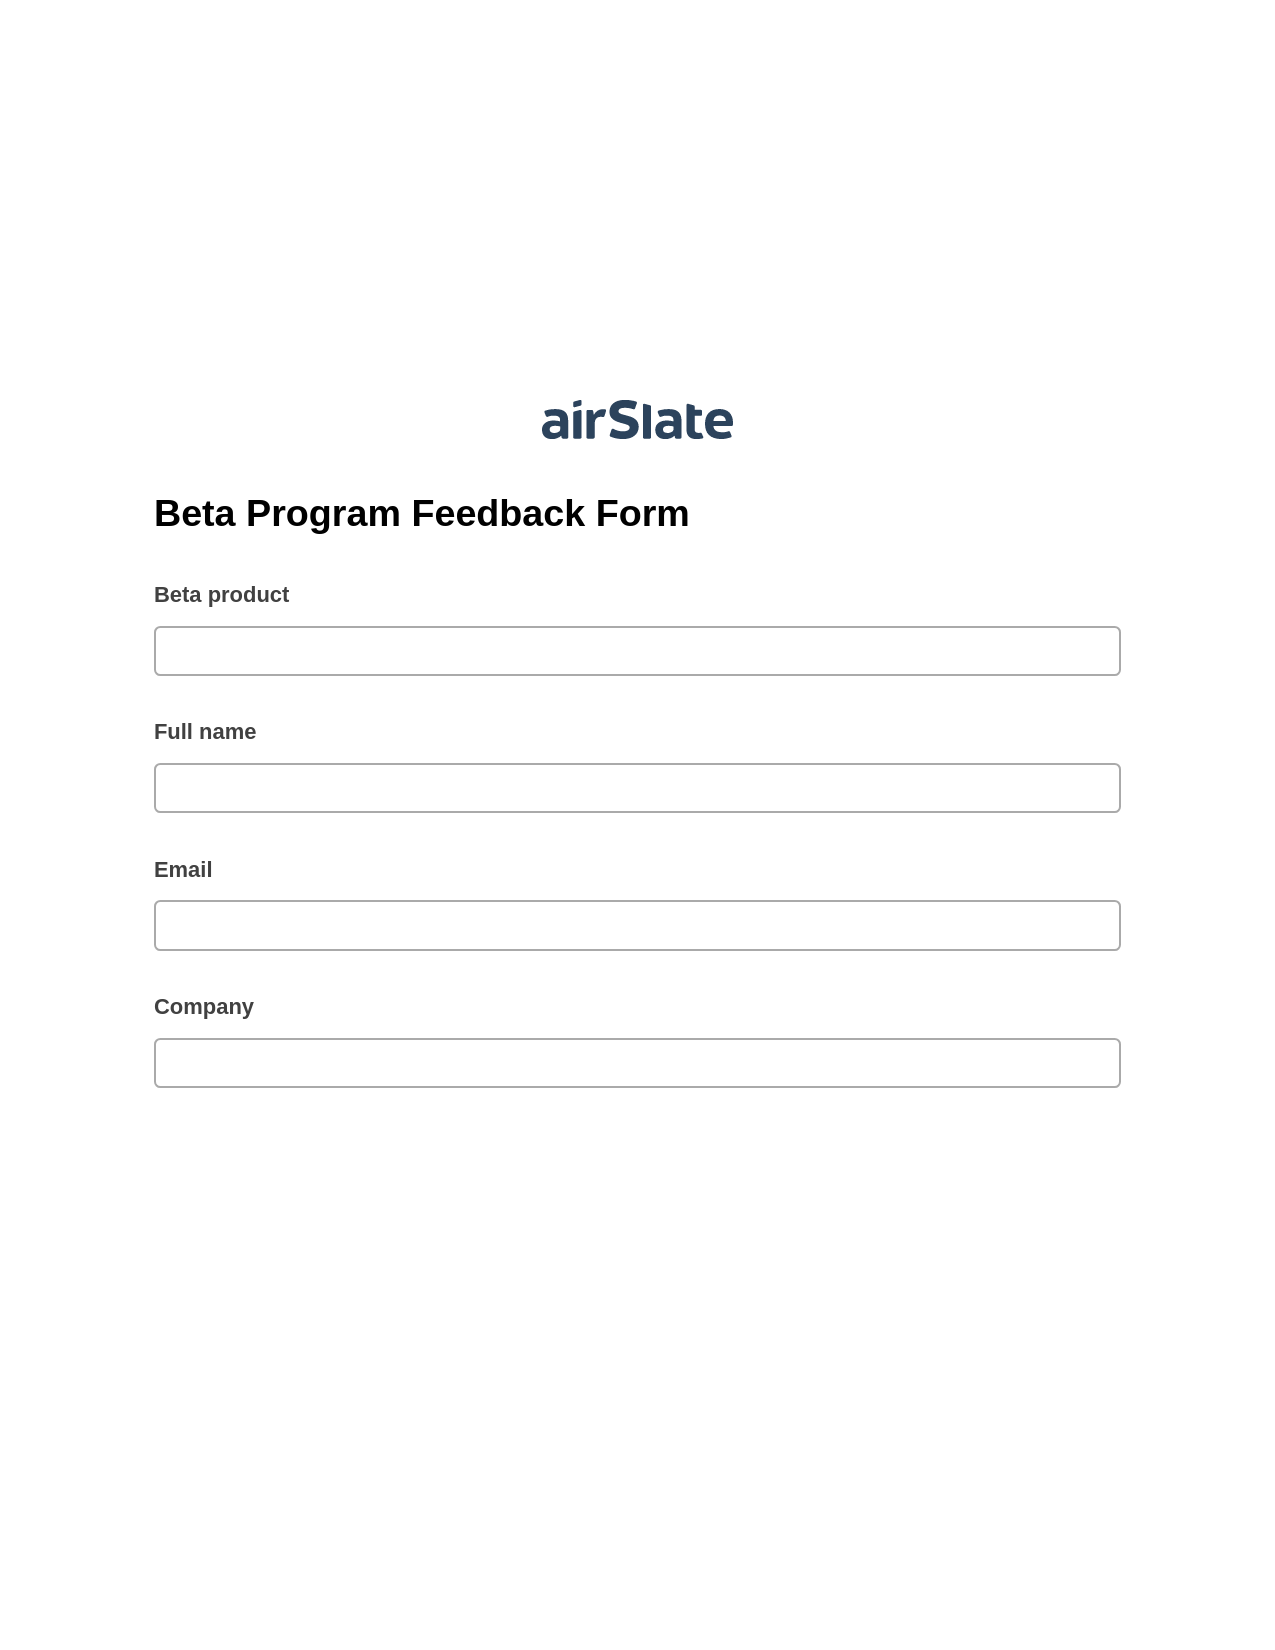 Multirole Beta Program Feedback Form Pre-fill from CSV File Bot, Set Signature Type Bot, Export to NetSuite Record Bot